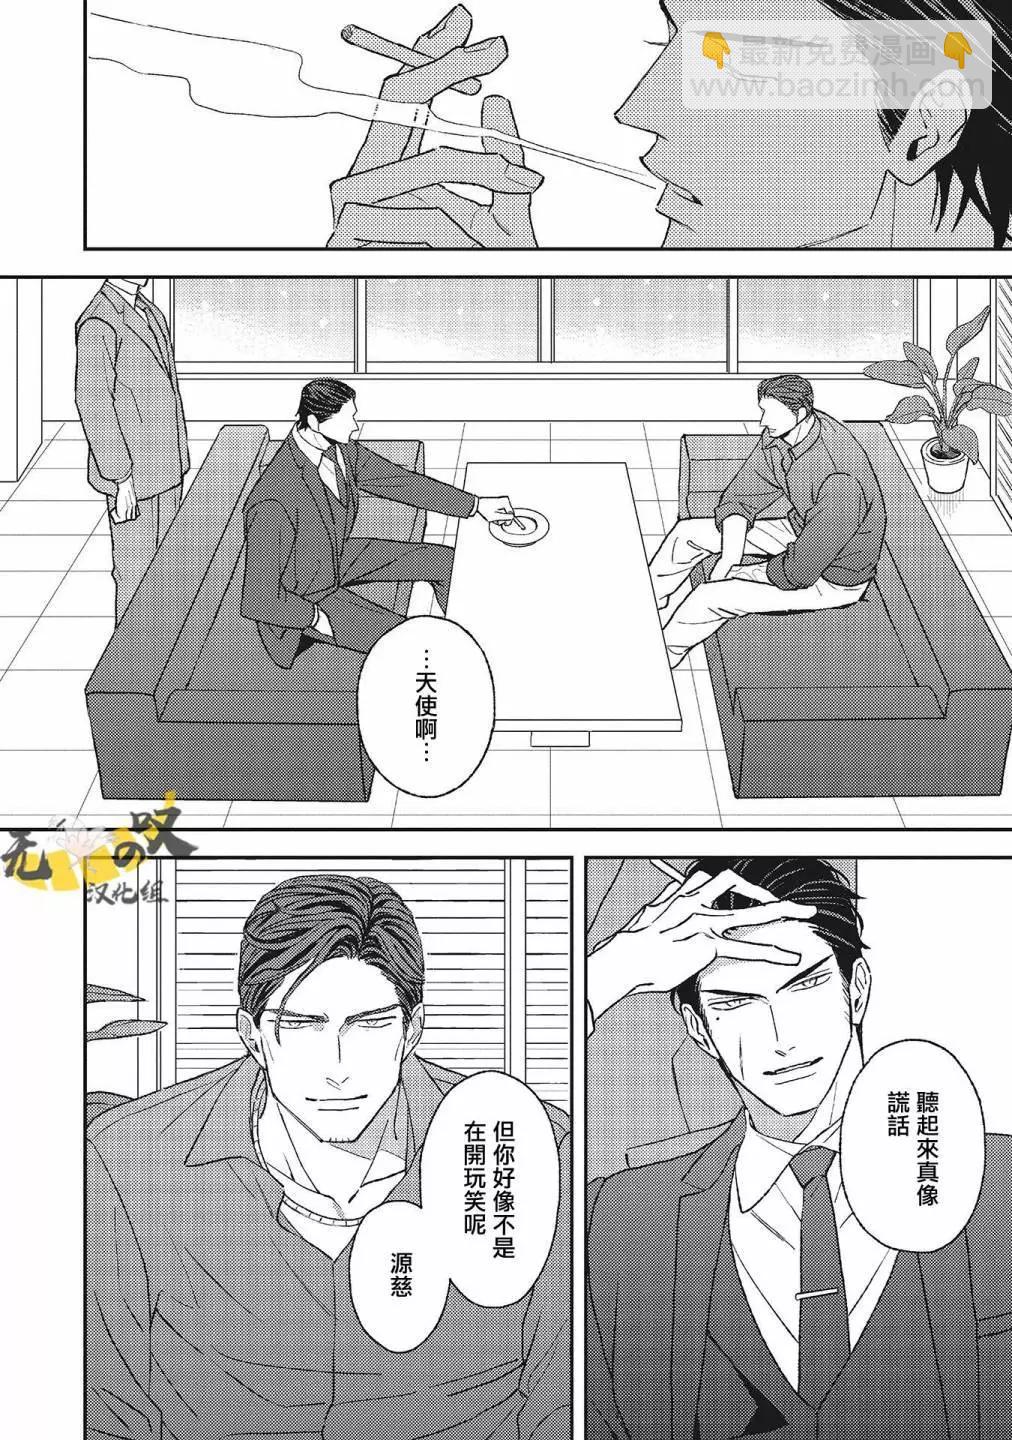 His Little Amber - 第08話 - 6